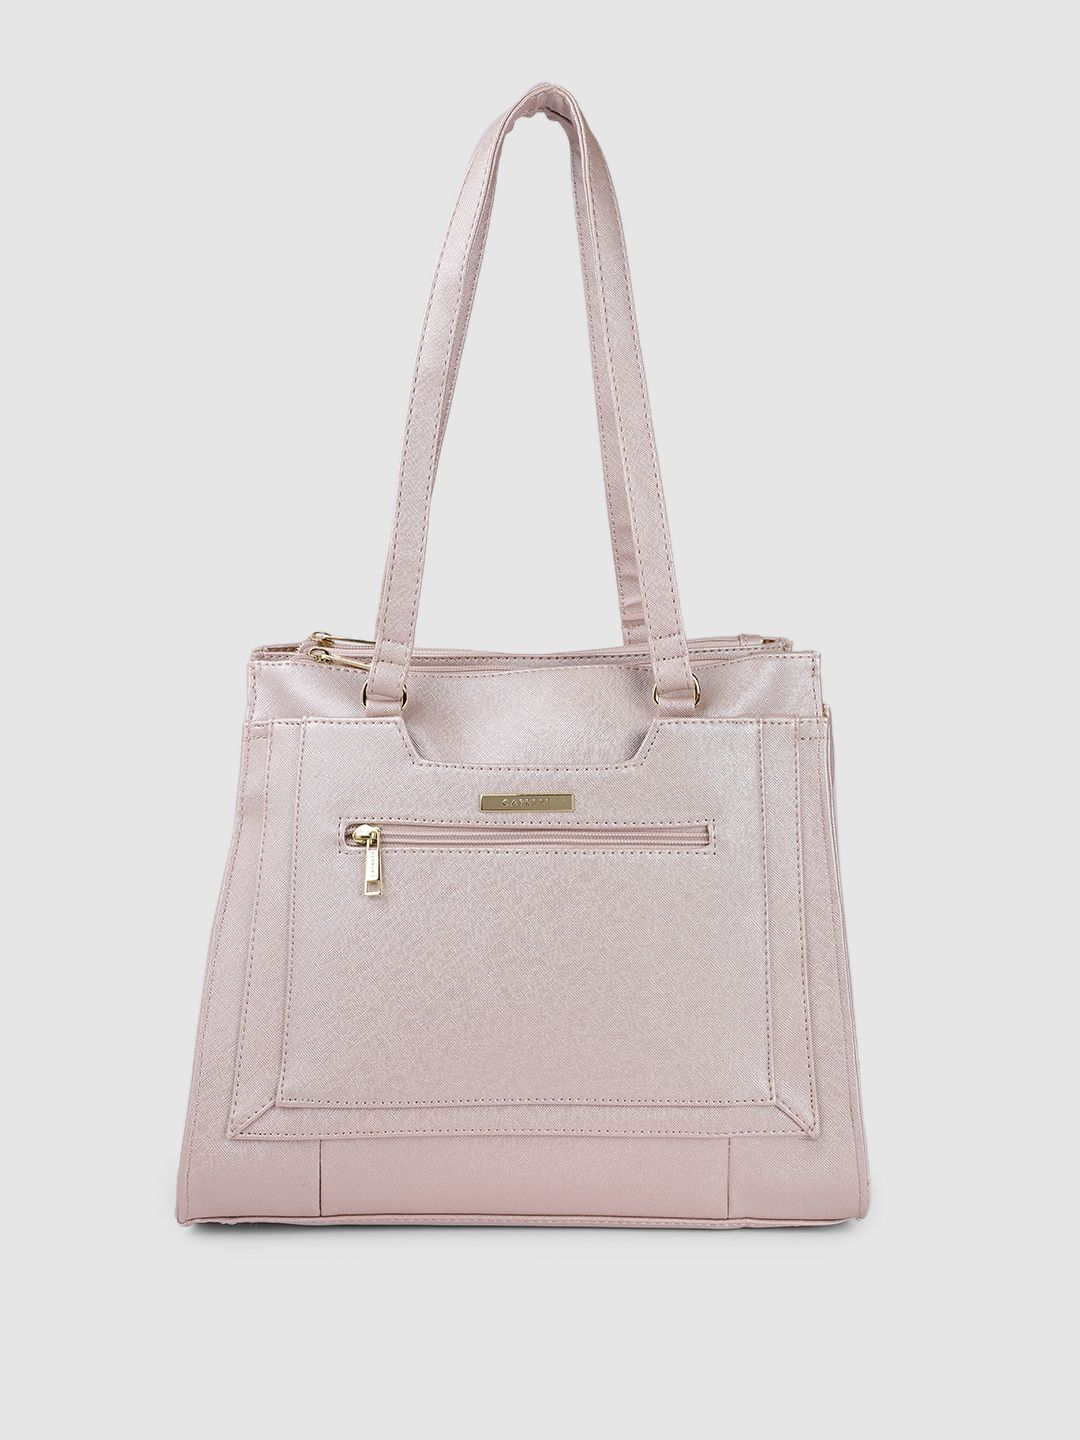 Caprese Rose Gold-Toned Leather Structured Shoulder Bag Price in India